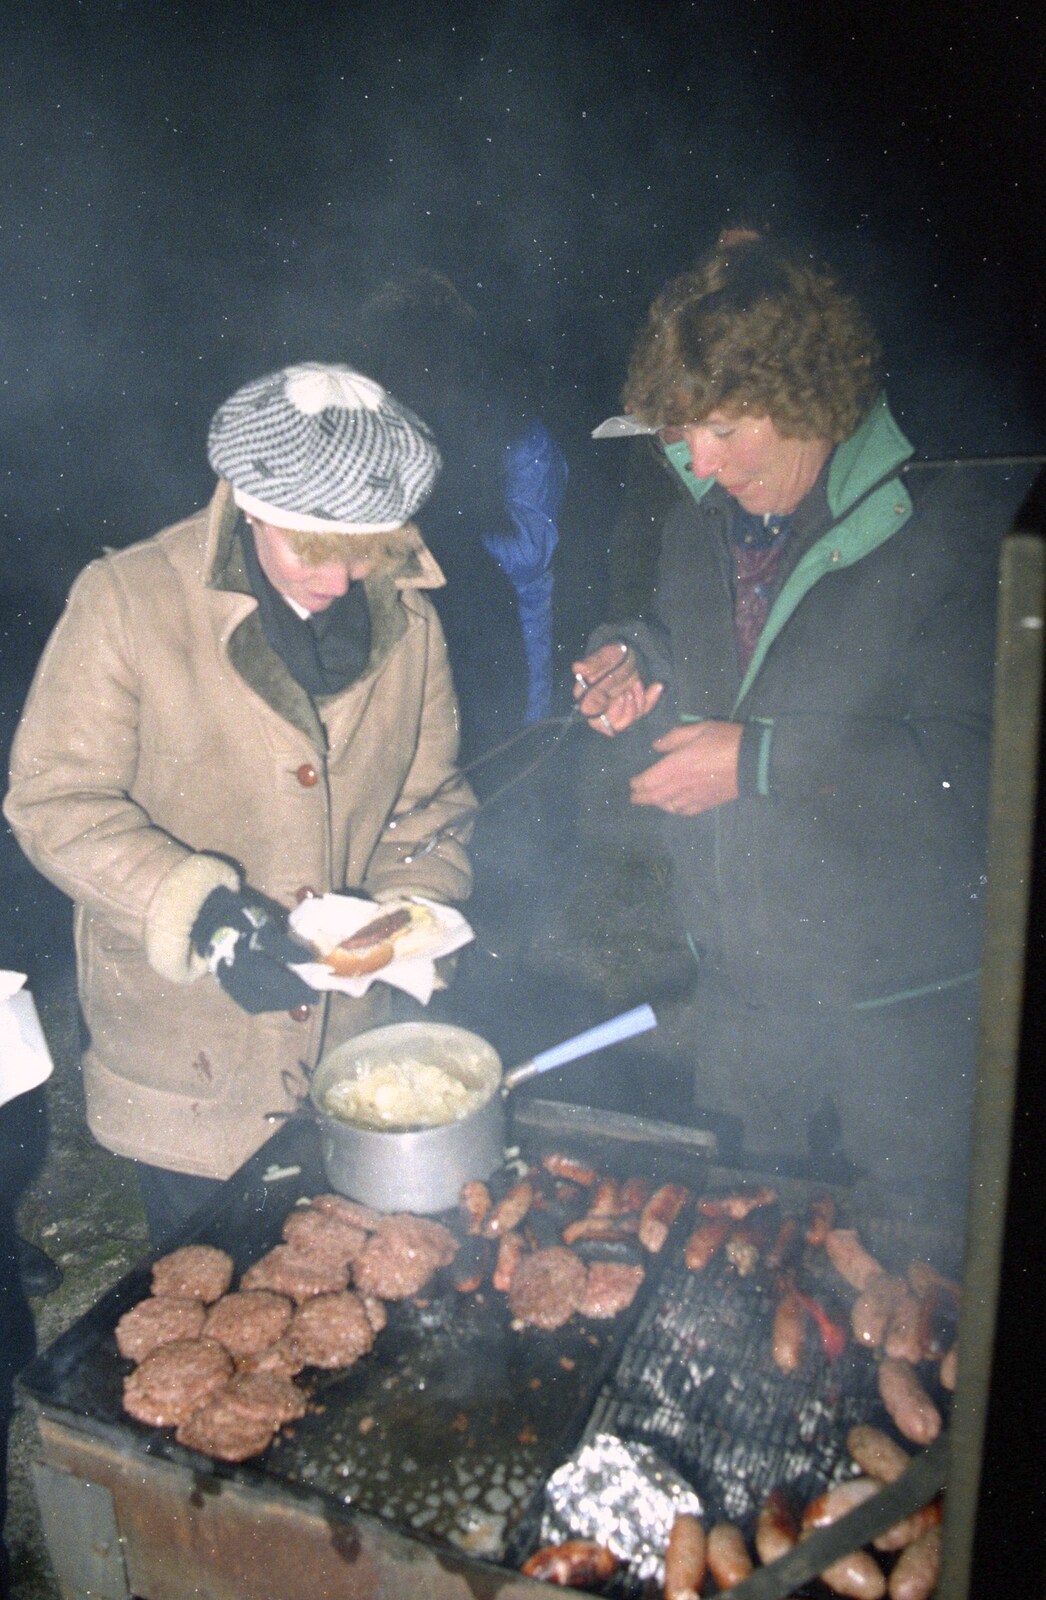 Brenda looks after the barbeque from Bonfire Night and Printec at the Stoke Ash White Horse, Suffolk - 5th November 1991